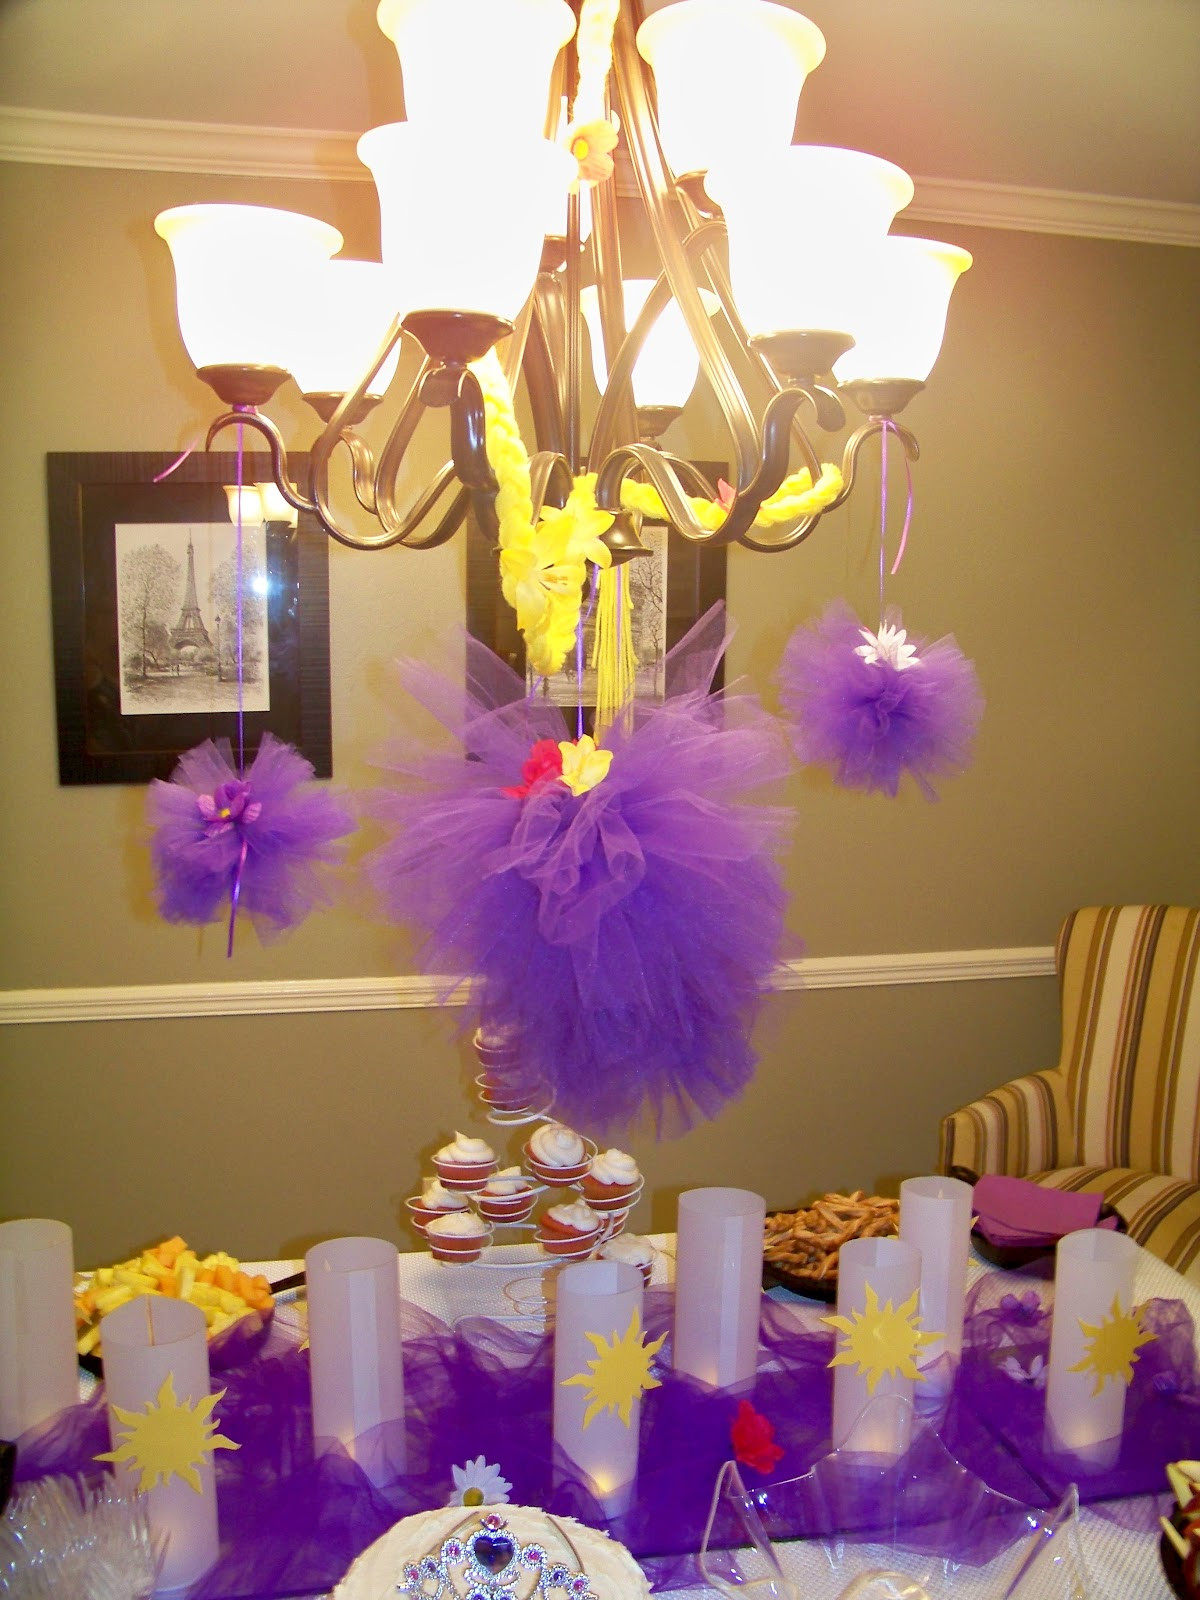 Tangled Birthday Party Supplies
 In Over Our Heads Rapunzel Birthday Party